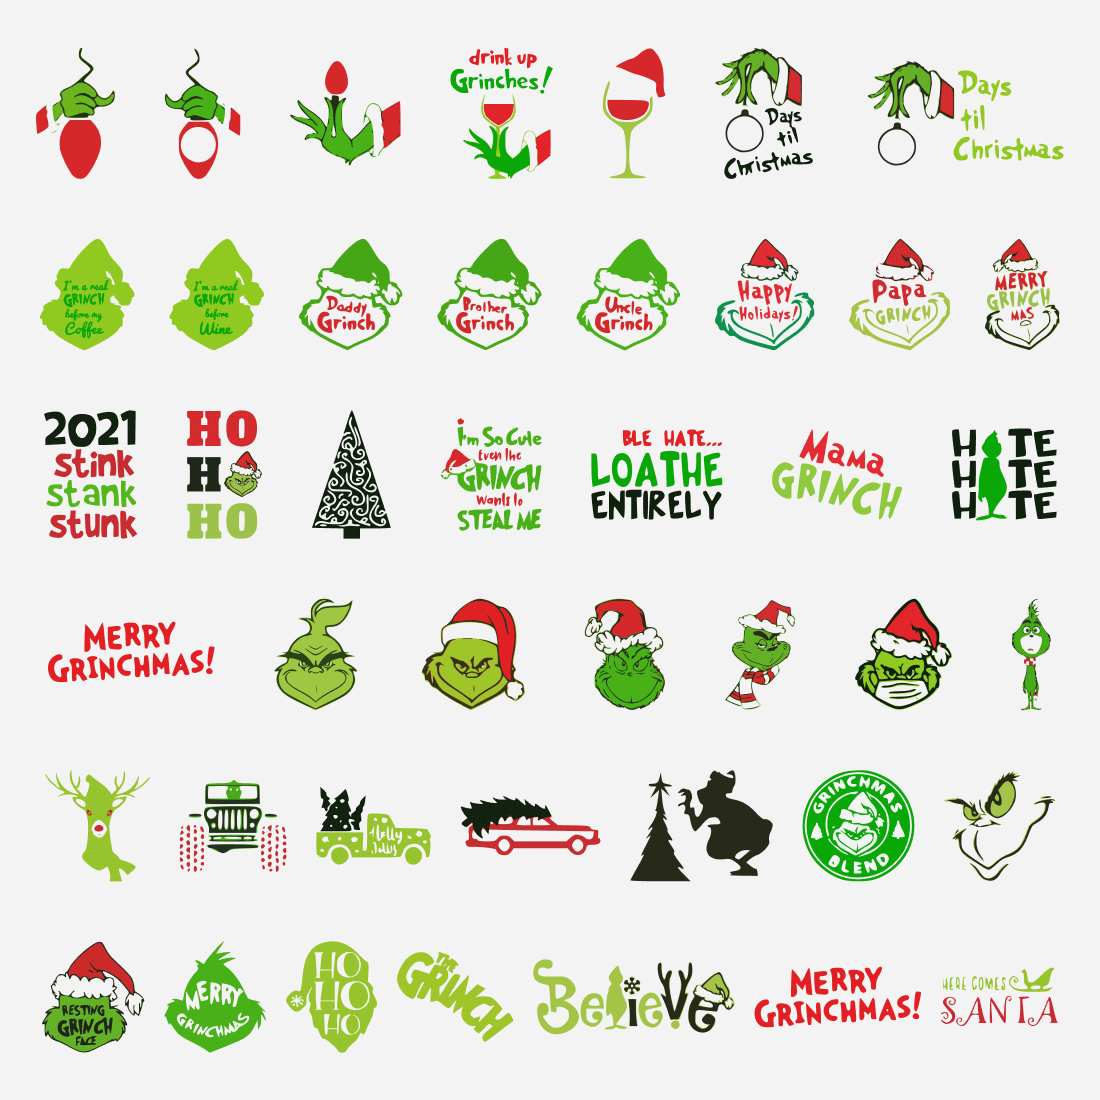 Images of the Grinch with and without a red hat, Christmas trees and lettering about the celebration of Merry Grinchmas.